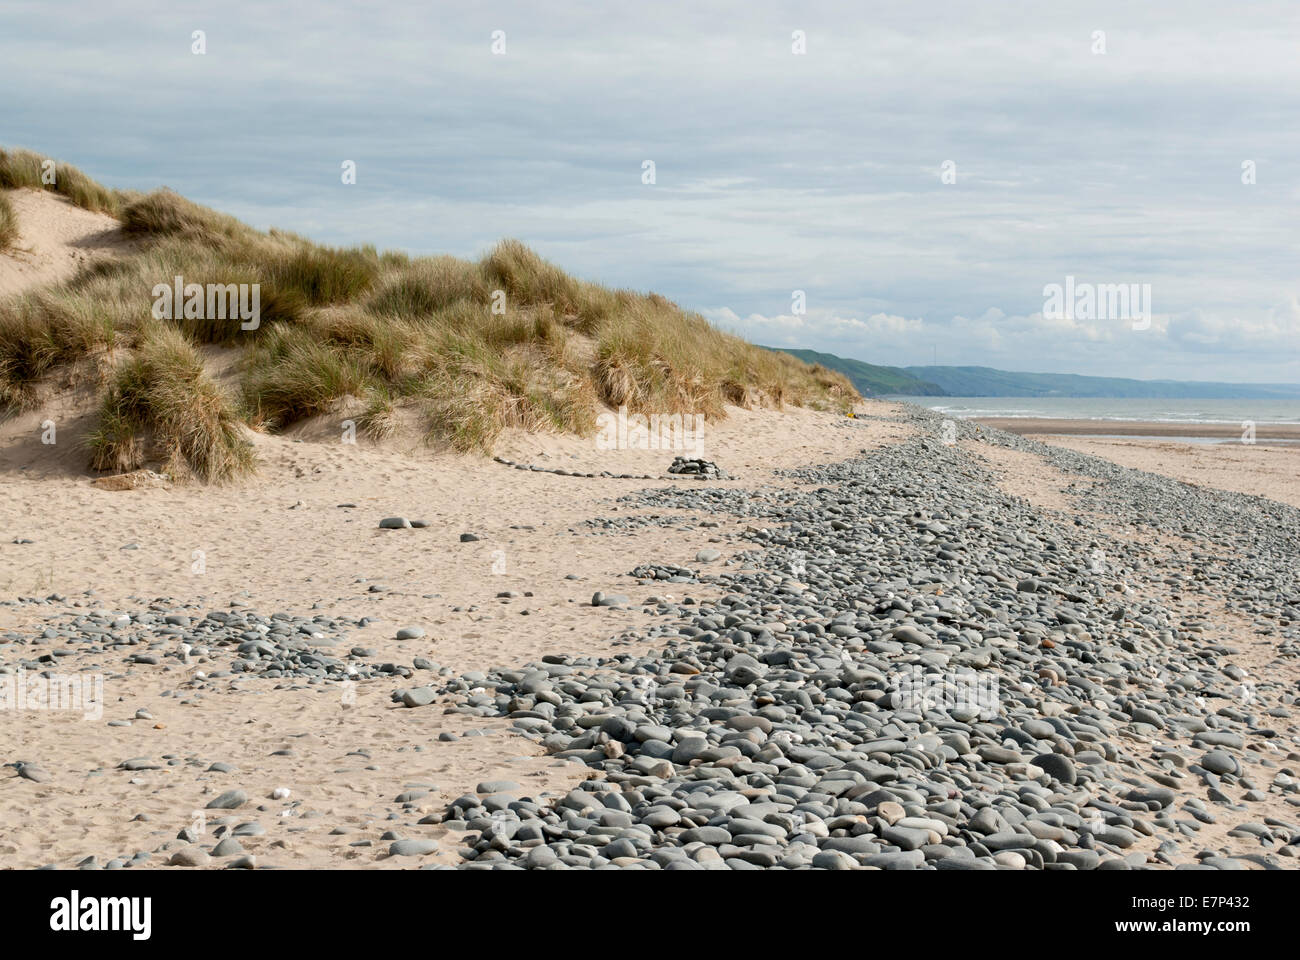 low down shot of beach with pebbles and grassy dunes in Ynyslas, Wales, UK Stock Photo